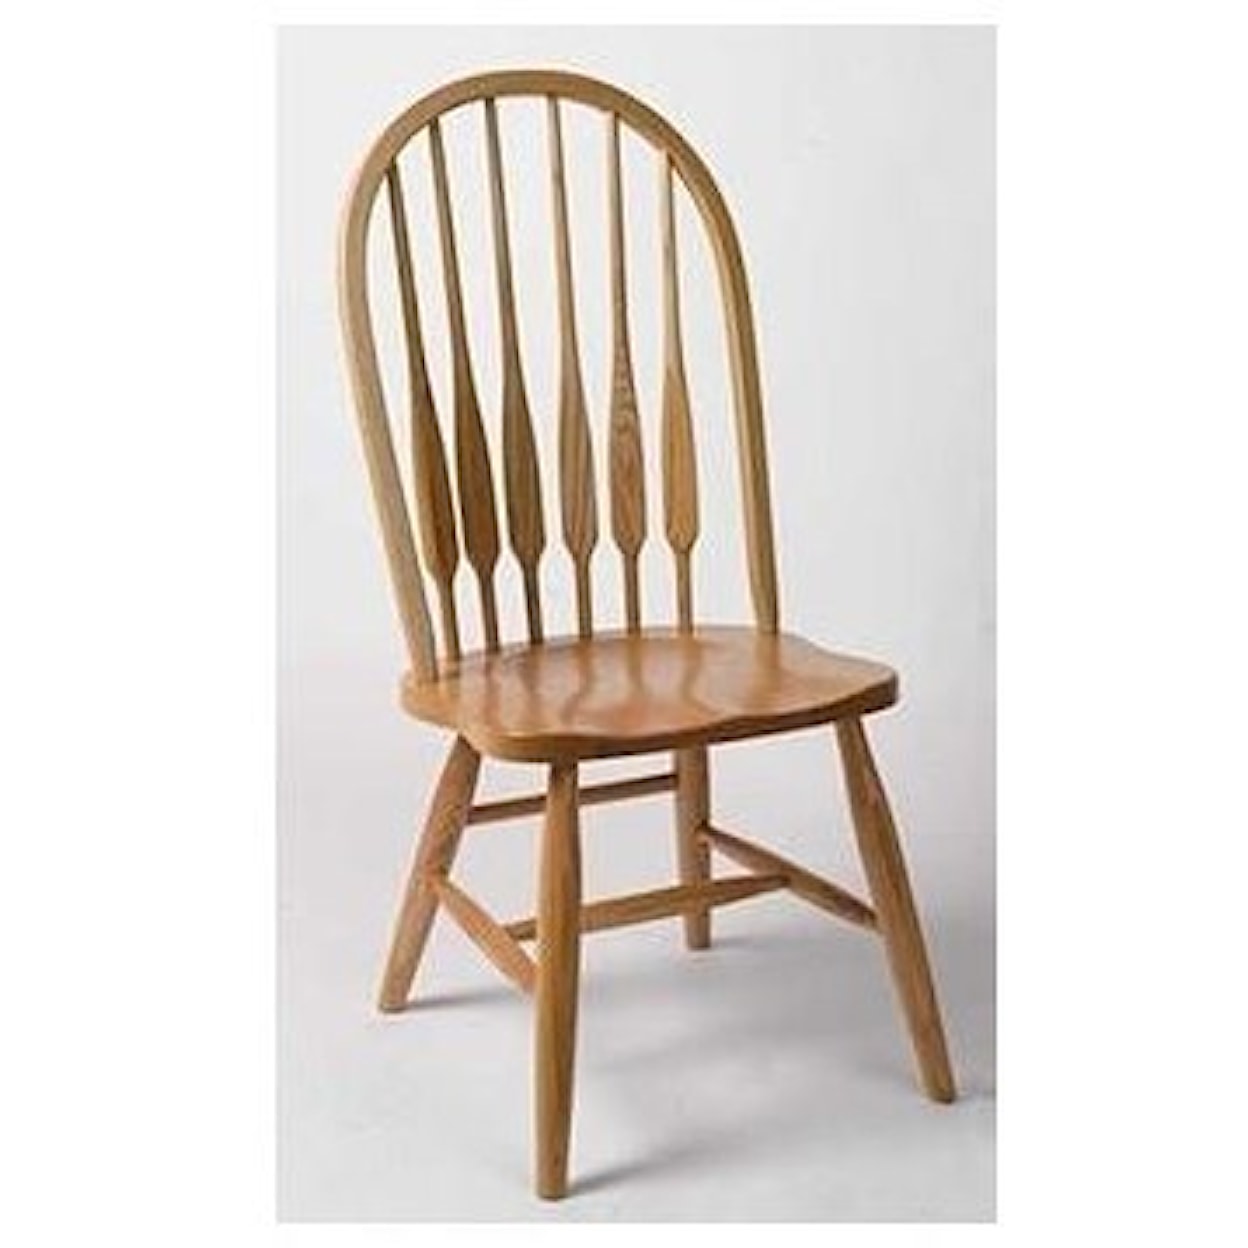 Horseshoe Bend Spindle Eight Spindle High Back Side Chair